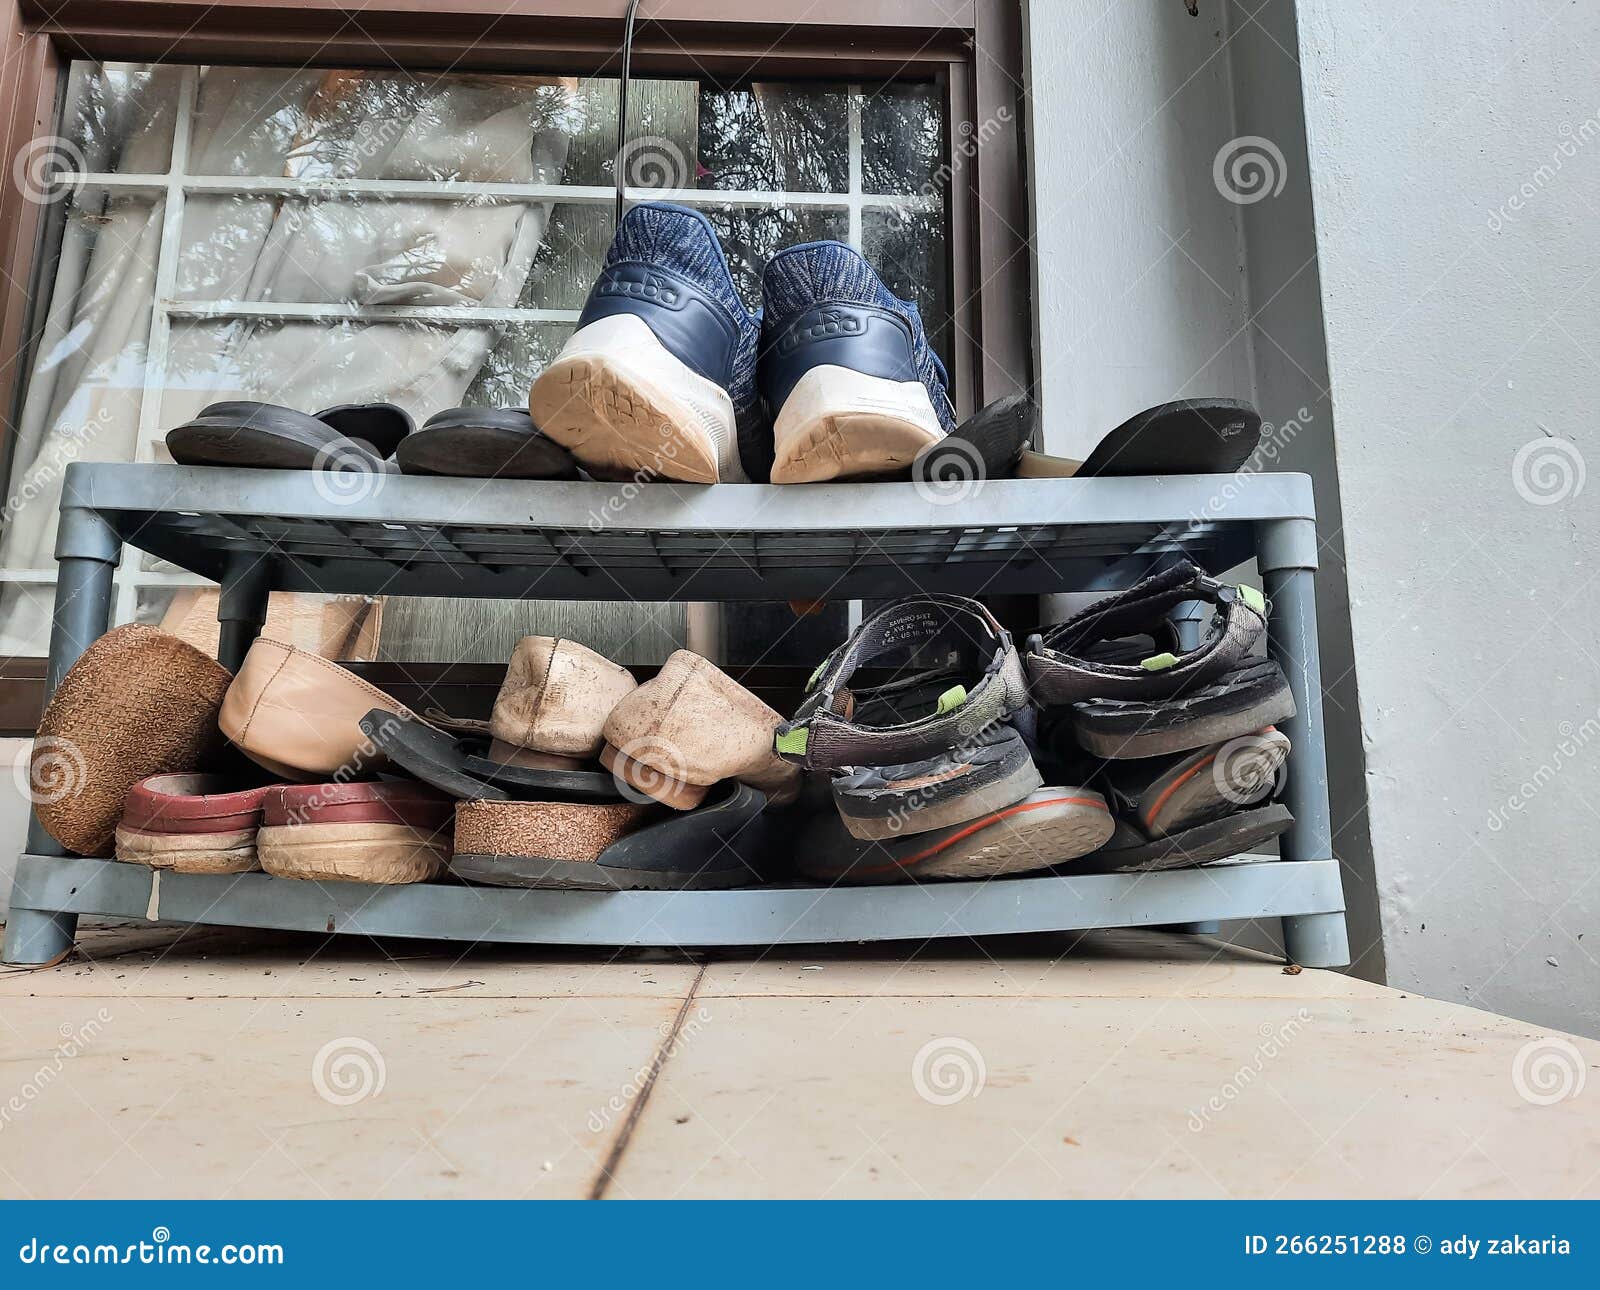 A Portrait of the Gray Shoe Rack Which Contains Lots of Sandals and ...